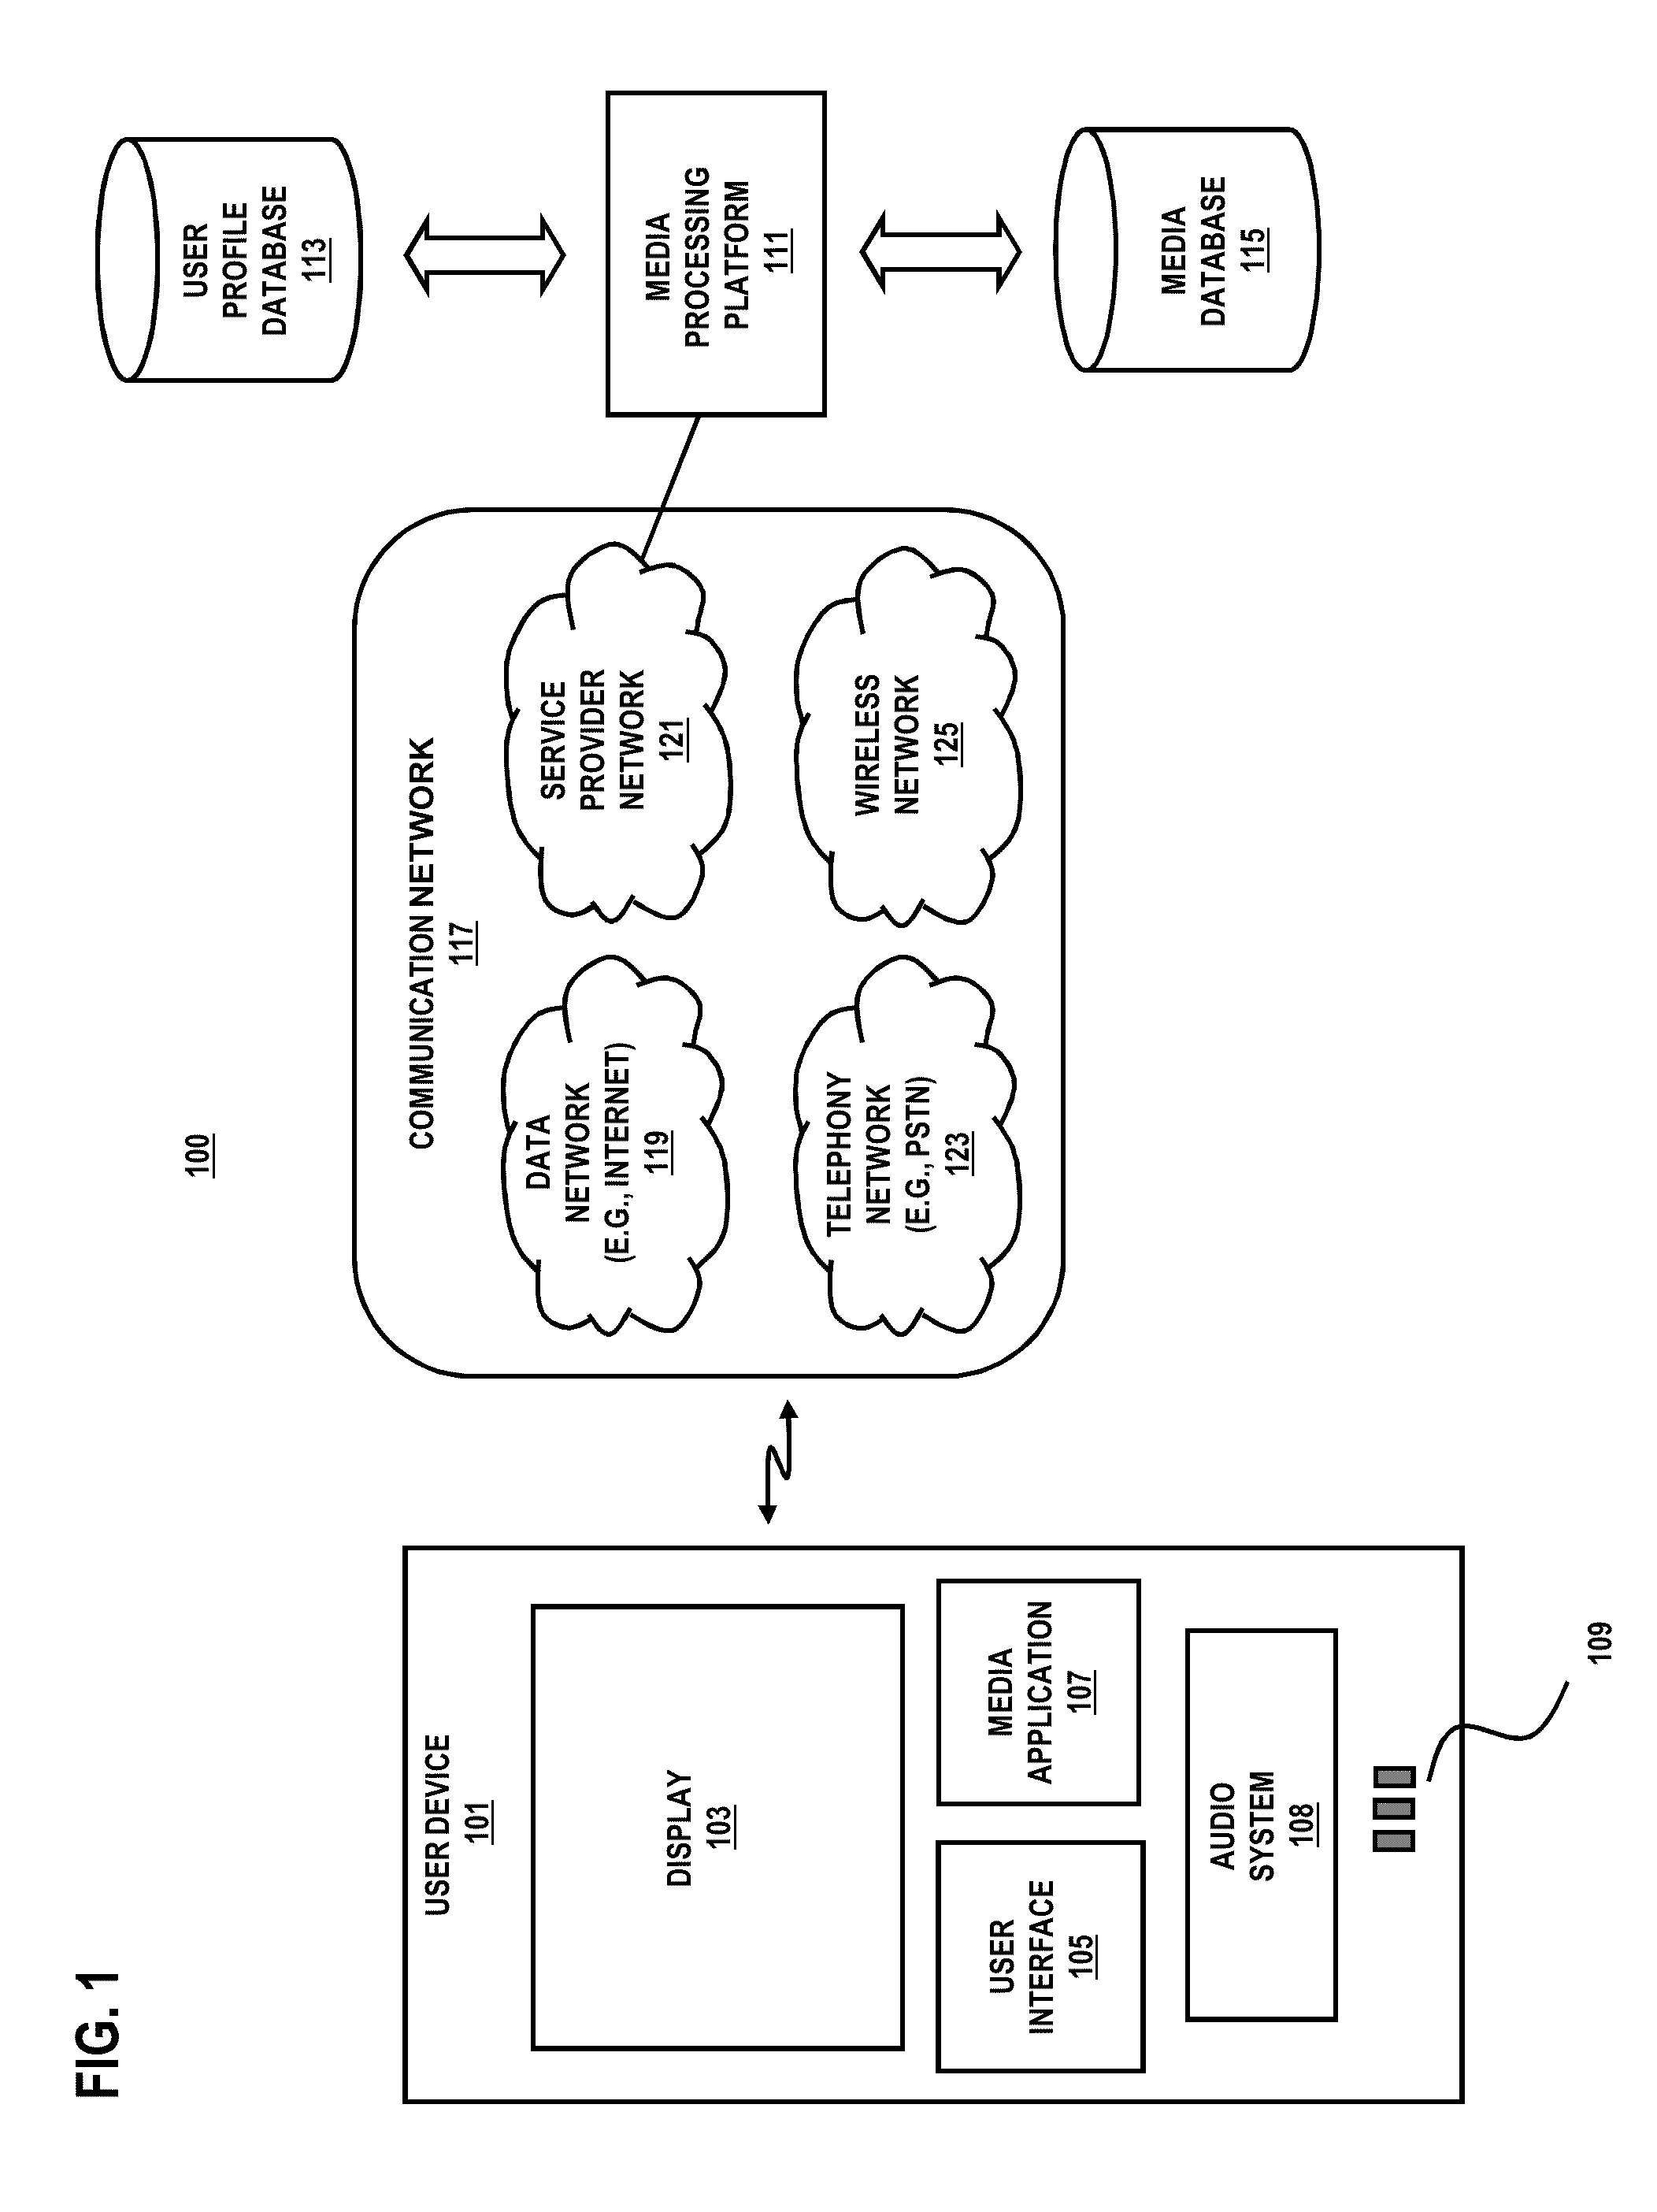 Method and apparatus for media rendering services using gesture and/or voice control